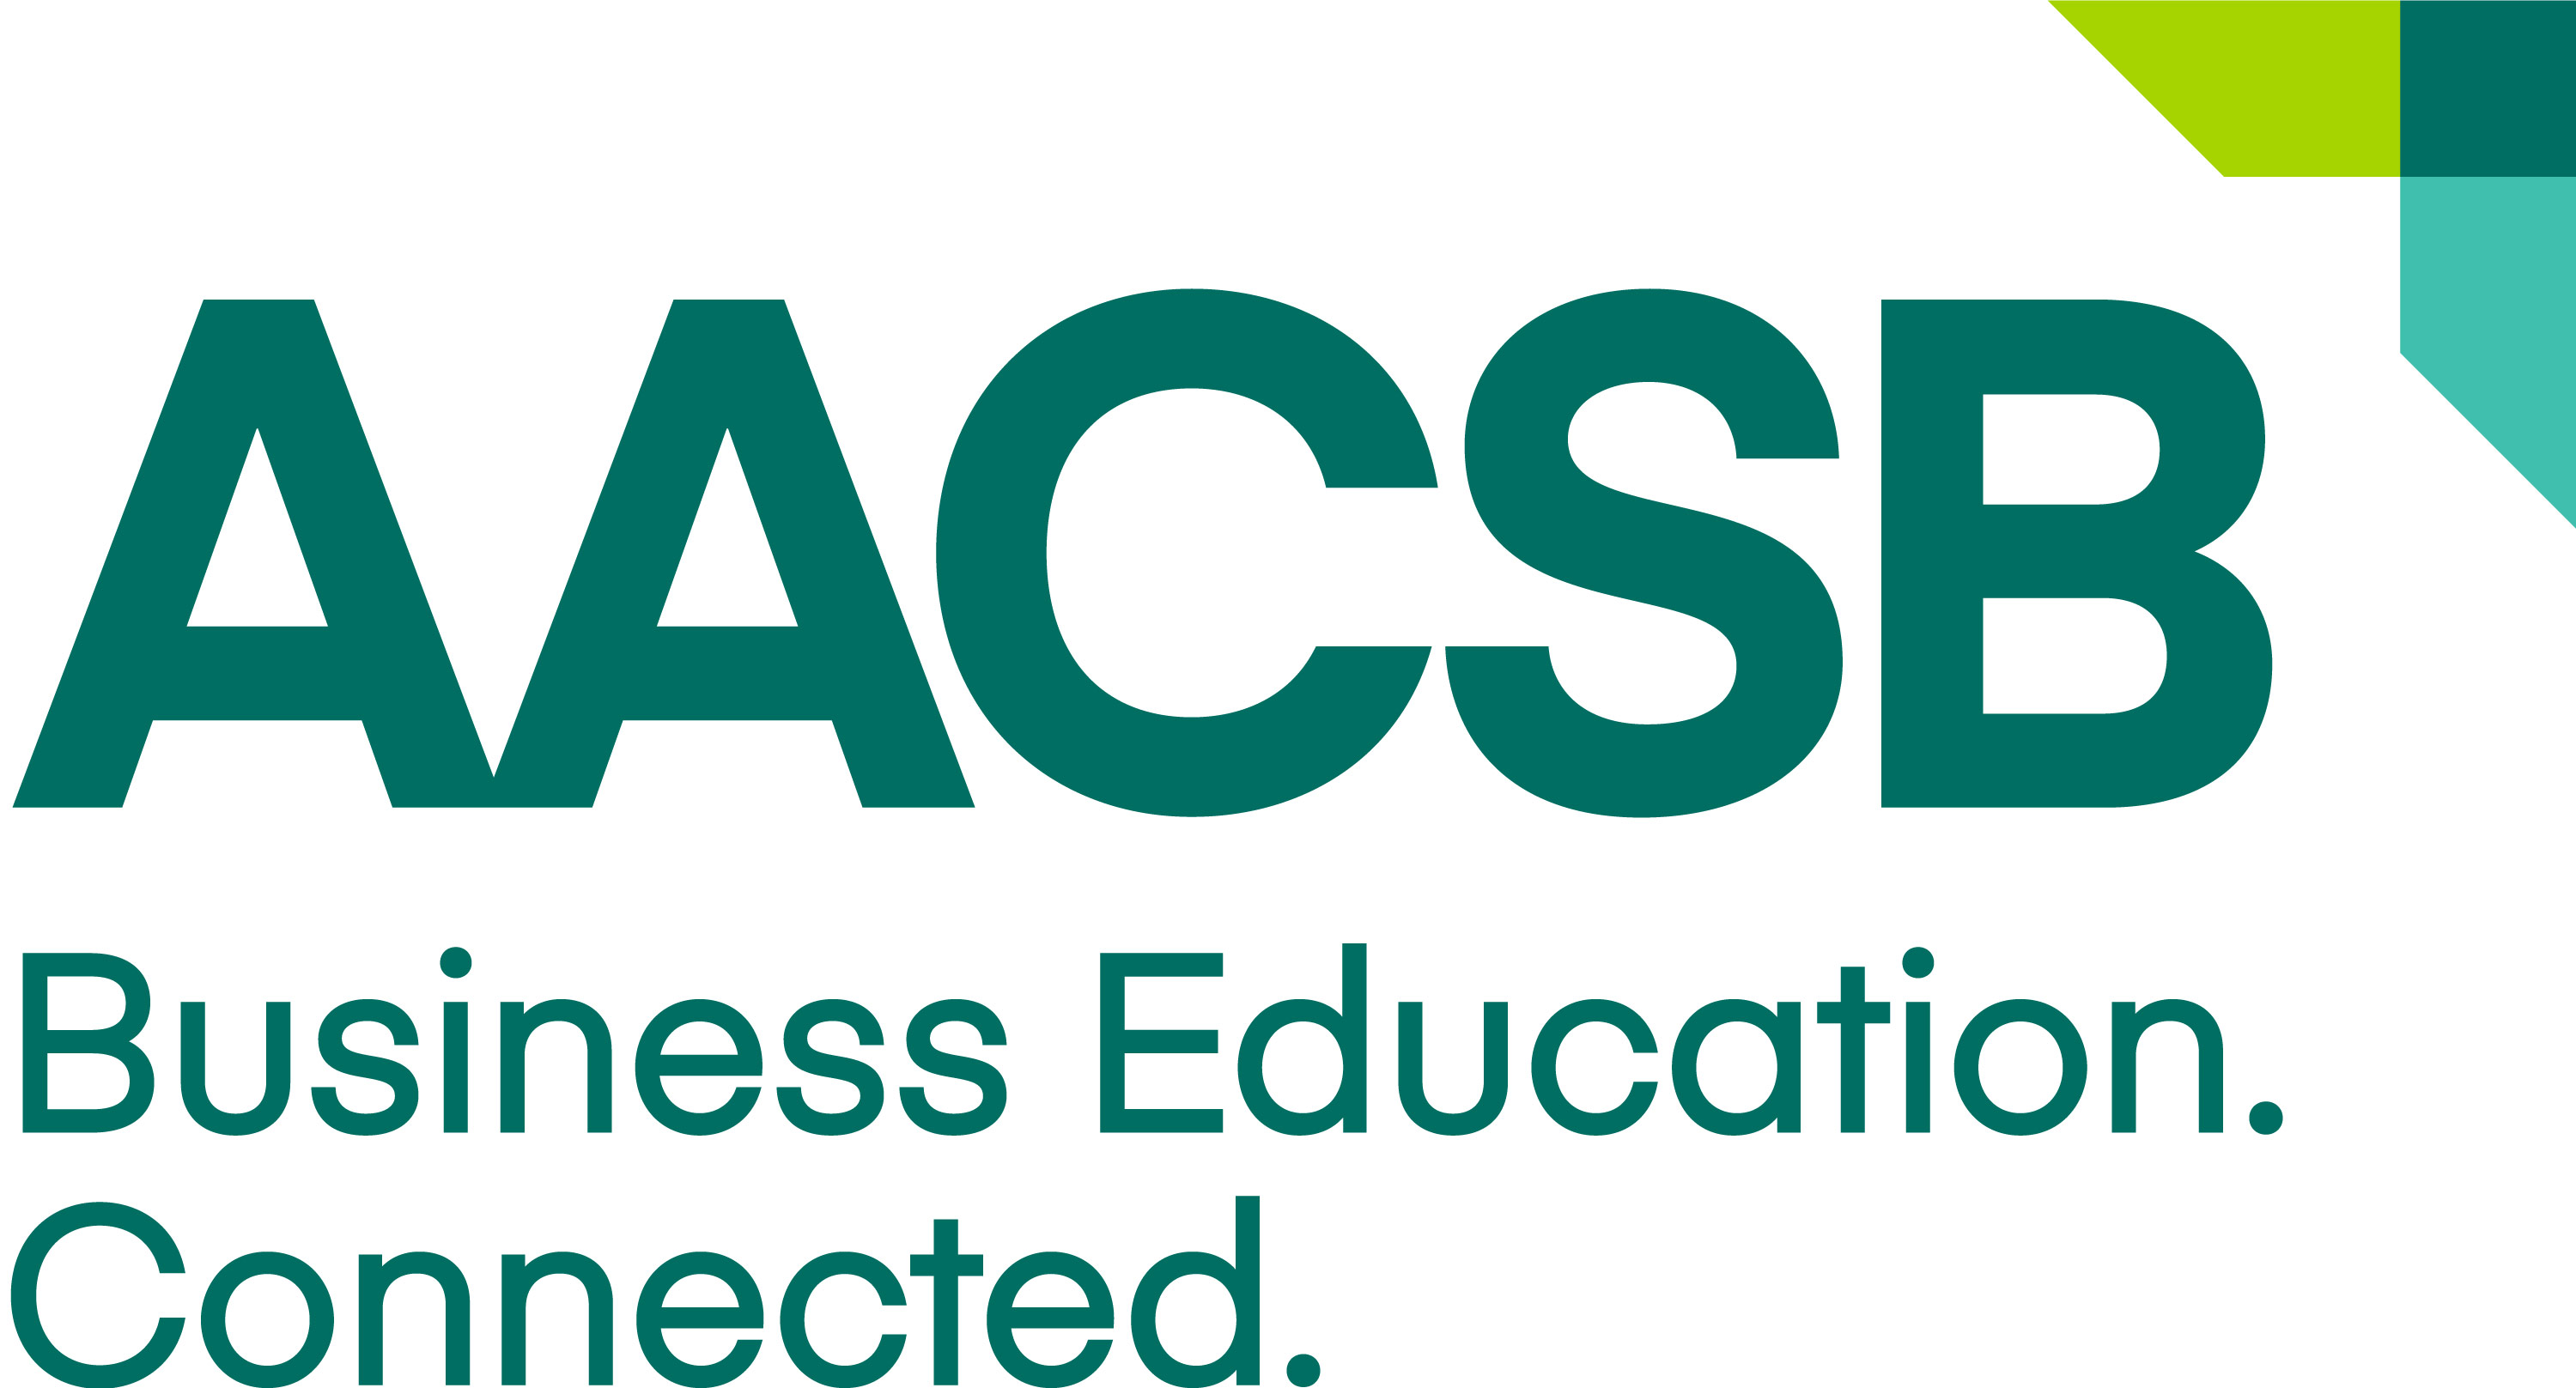 AACSB logo with tagline